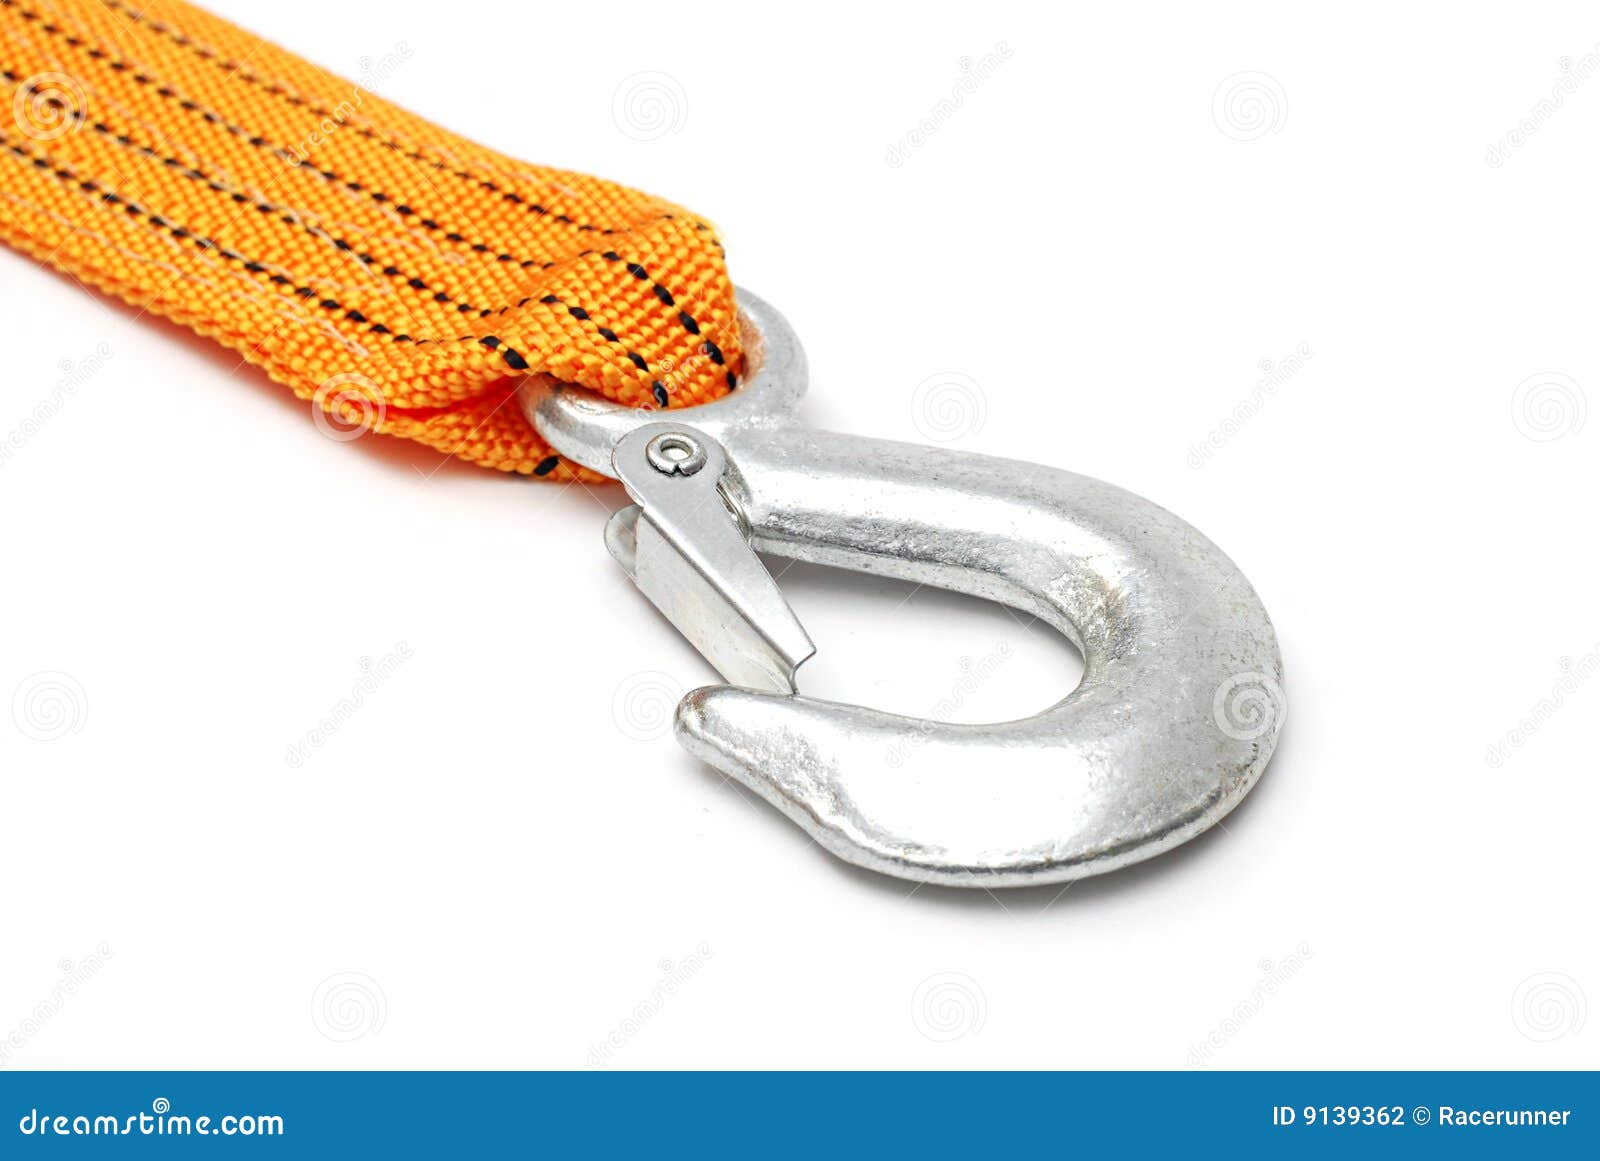 A Tow Rope with Hooks on a Light Background. Stock Photo - Image